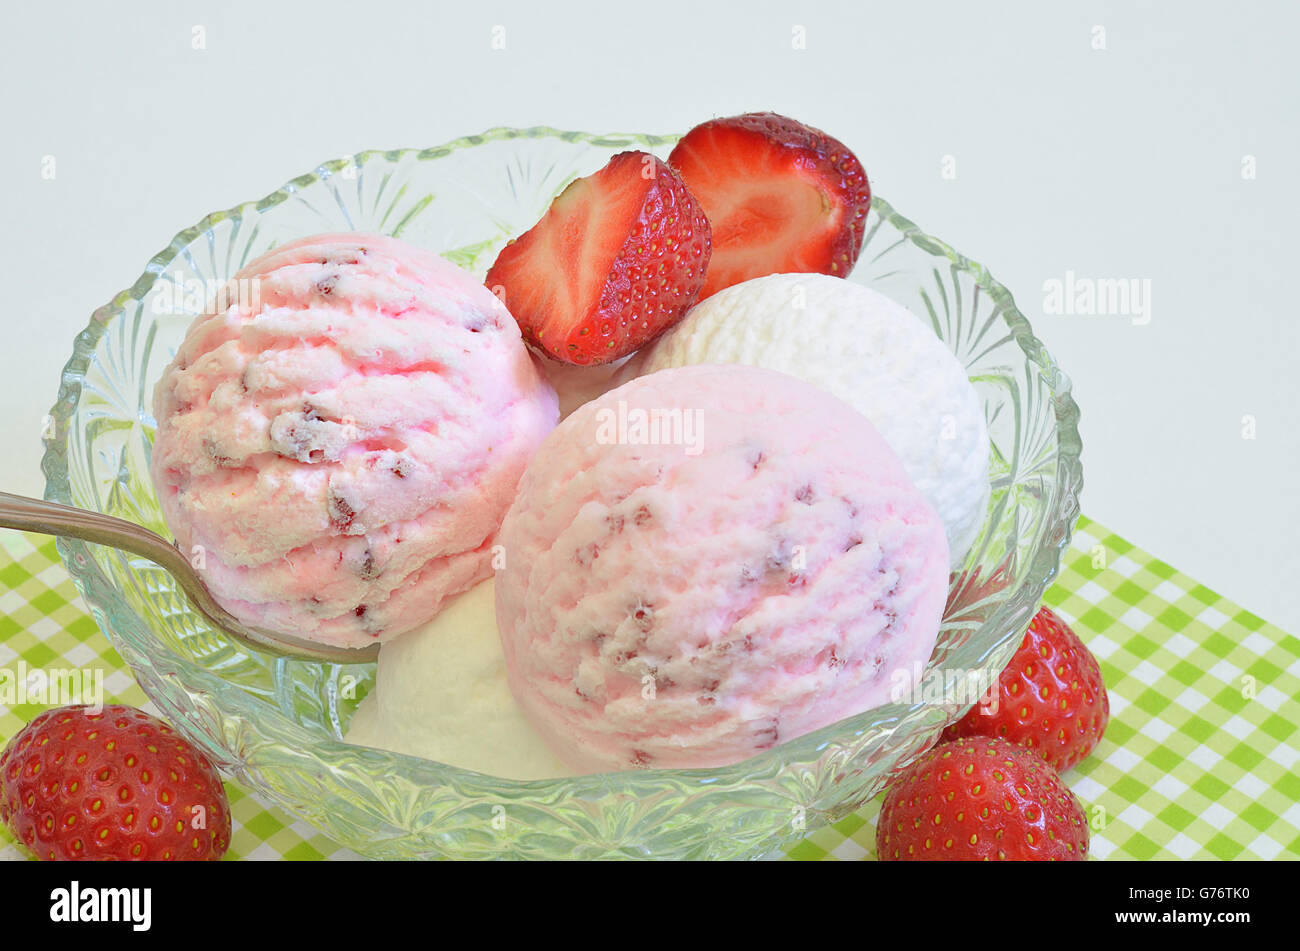 scoops of strawberry ice cream and vanilla ice cream in a bowl with fresh strawberries, macro, close up, full frame, horizontal Stock Photo